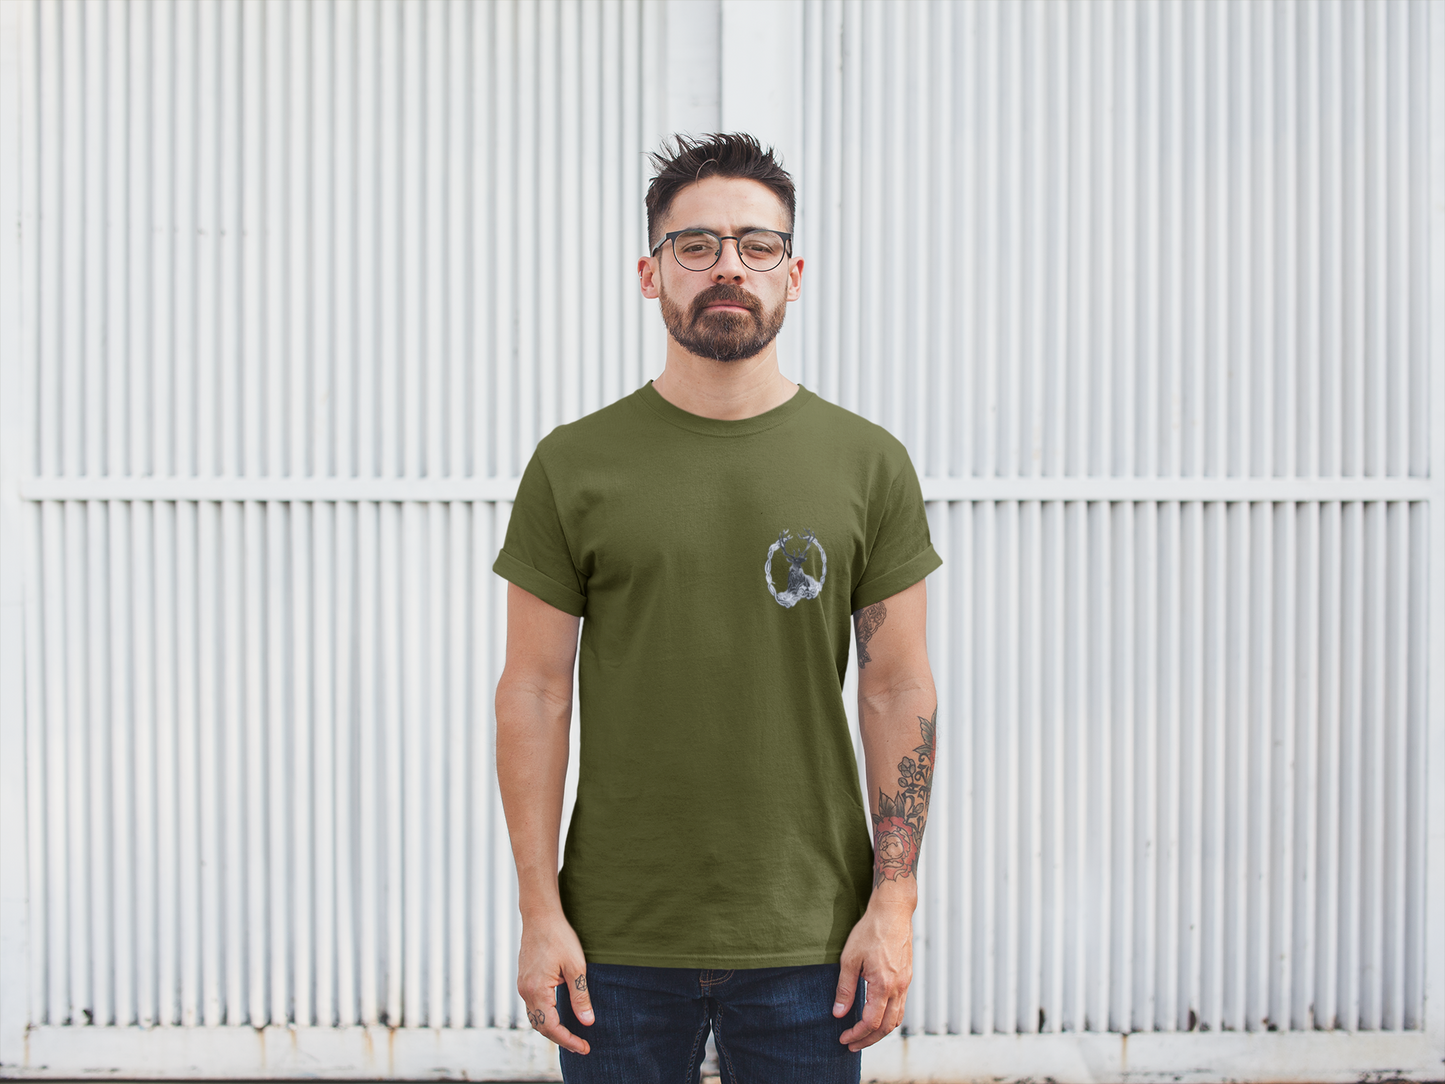 Attracted olive green shirt